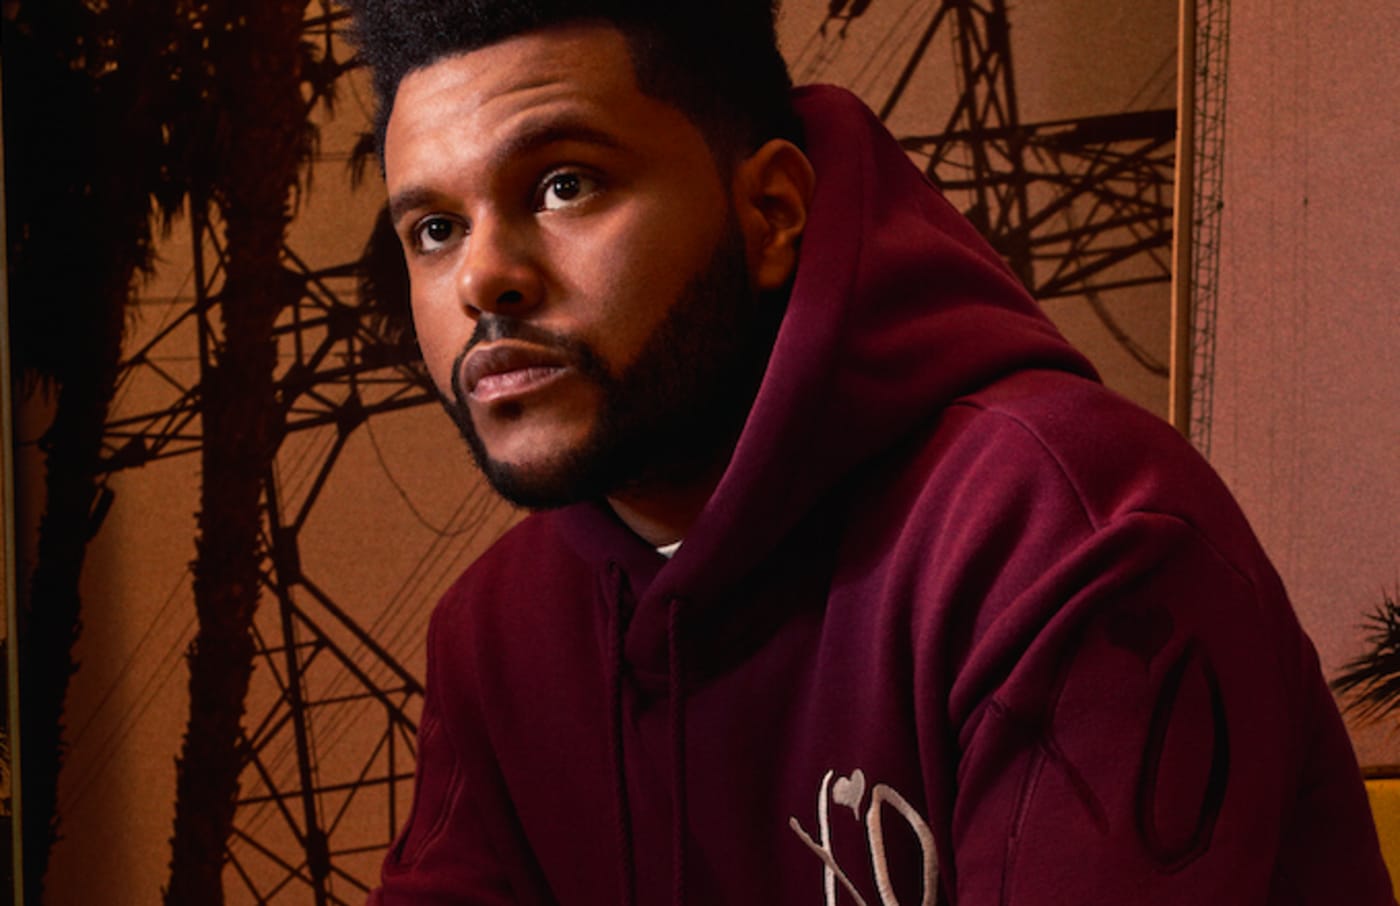 The Weeknd x H&M